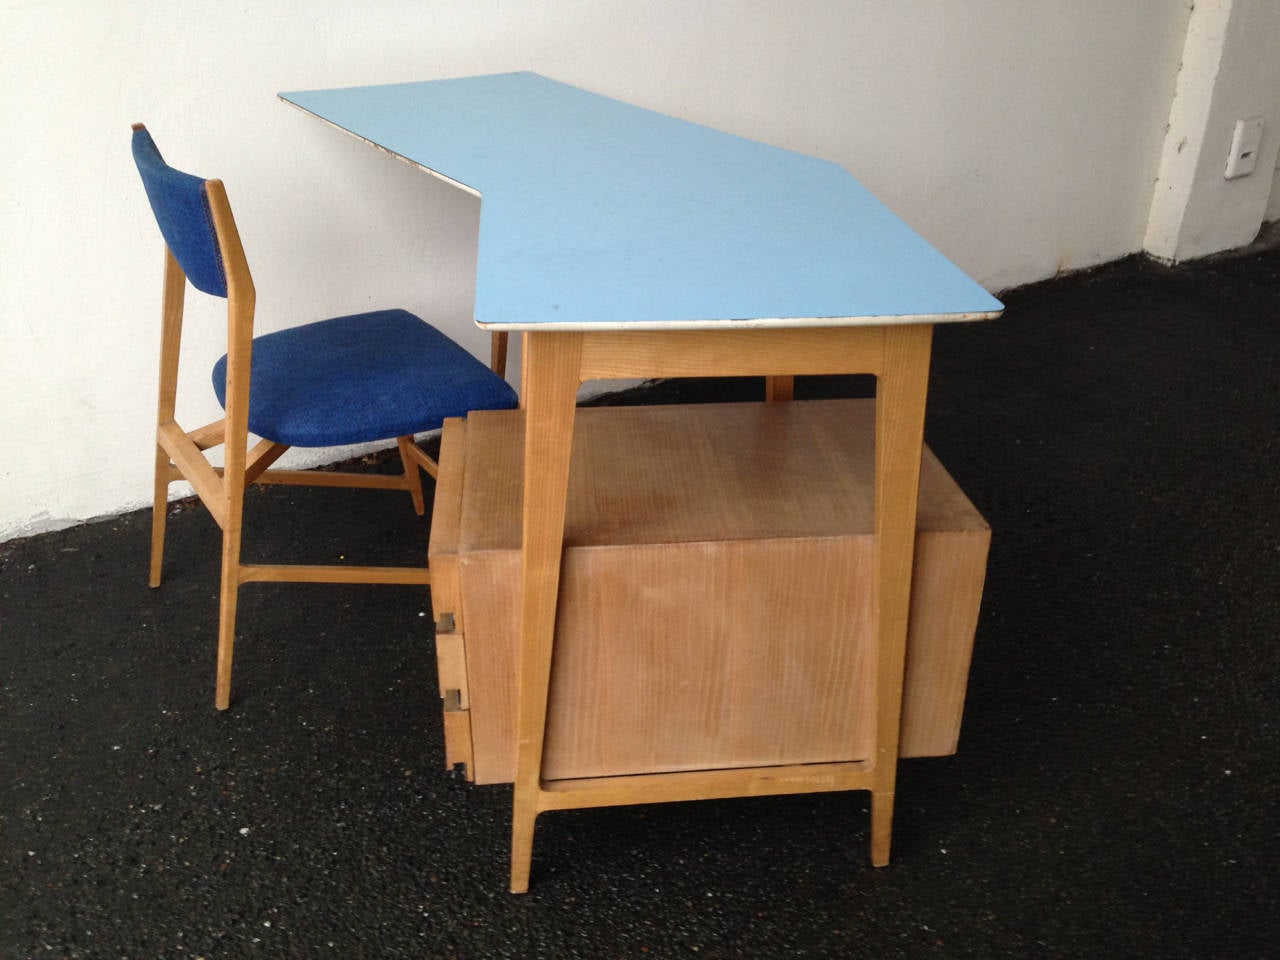 20th Century Small Curved Desk with Matching Chair Attributed to Gio Ponti